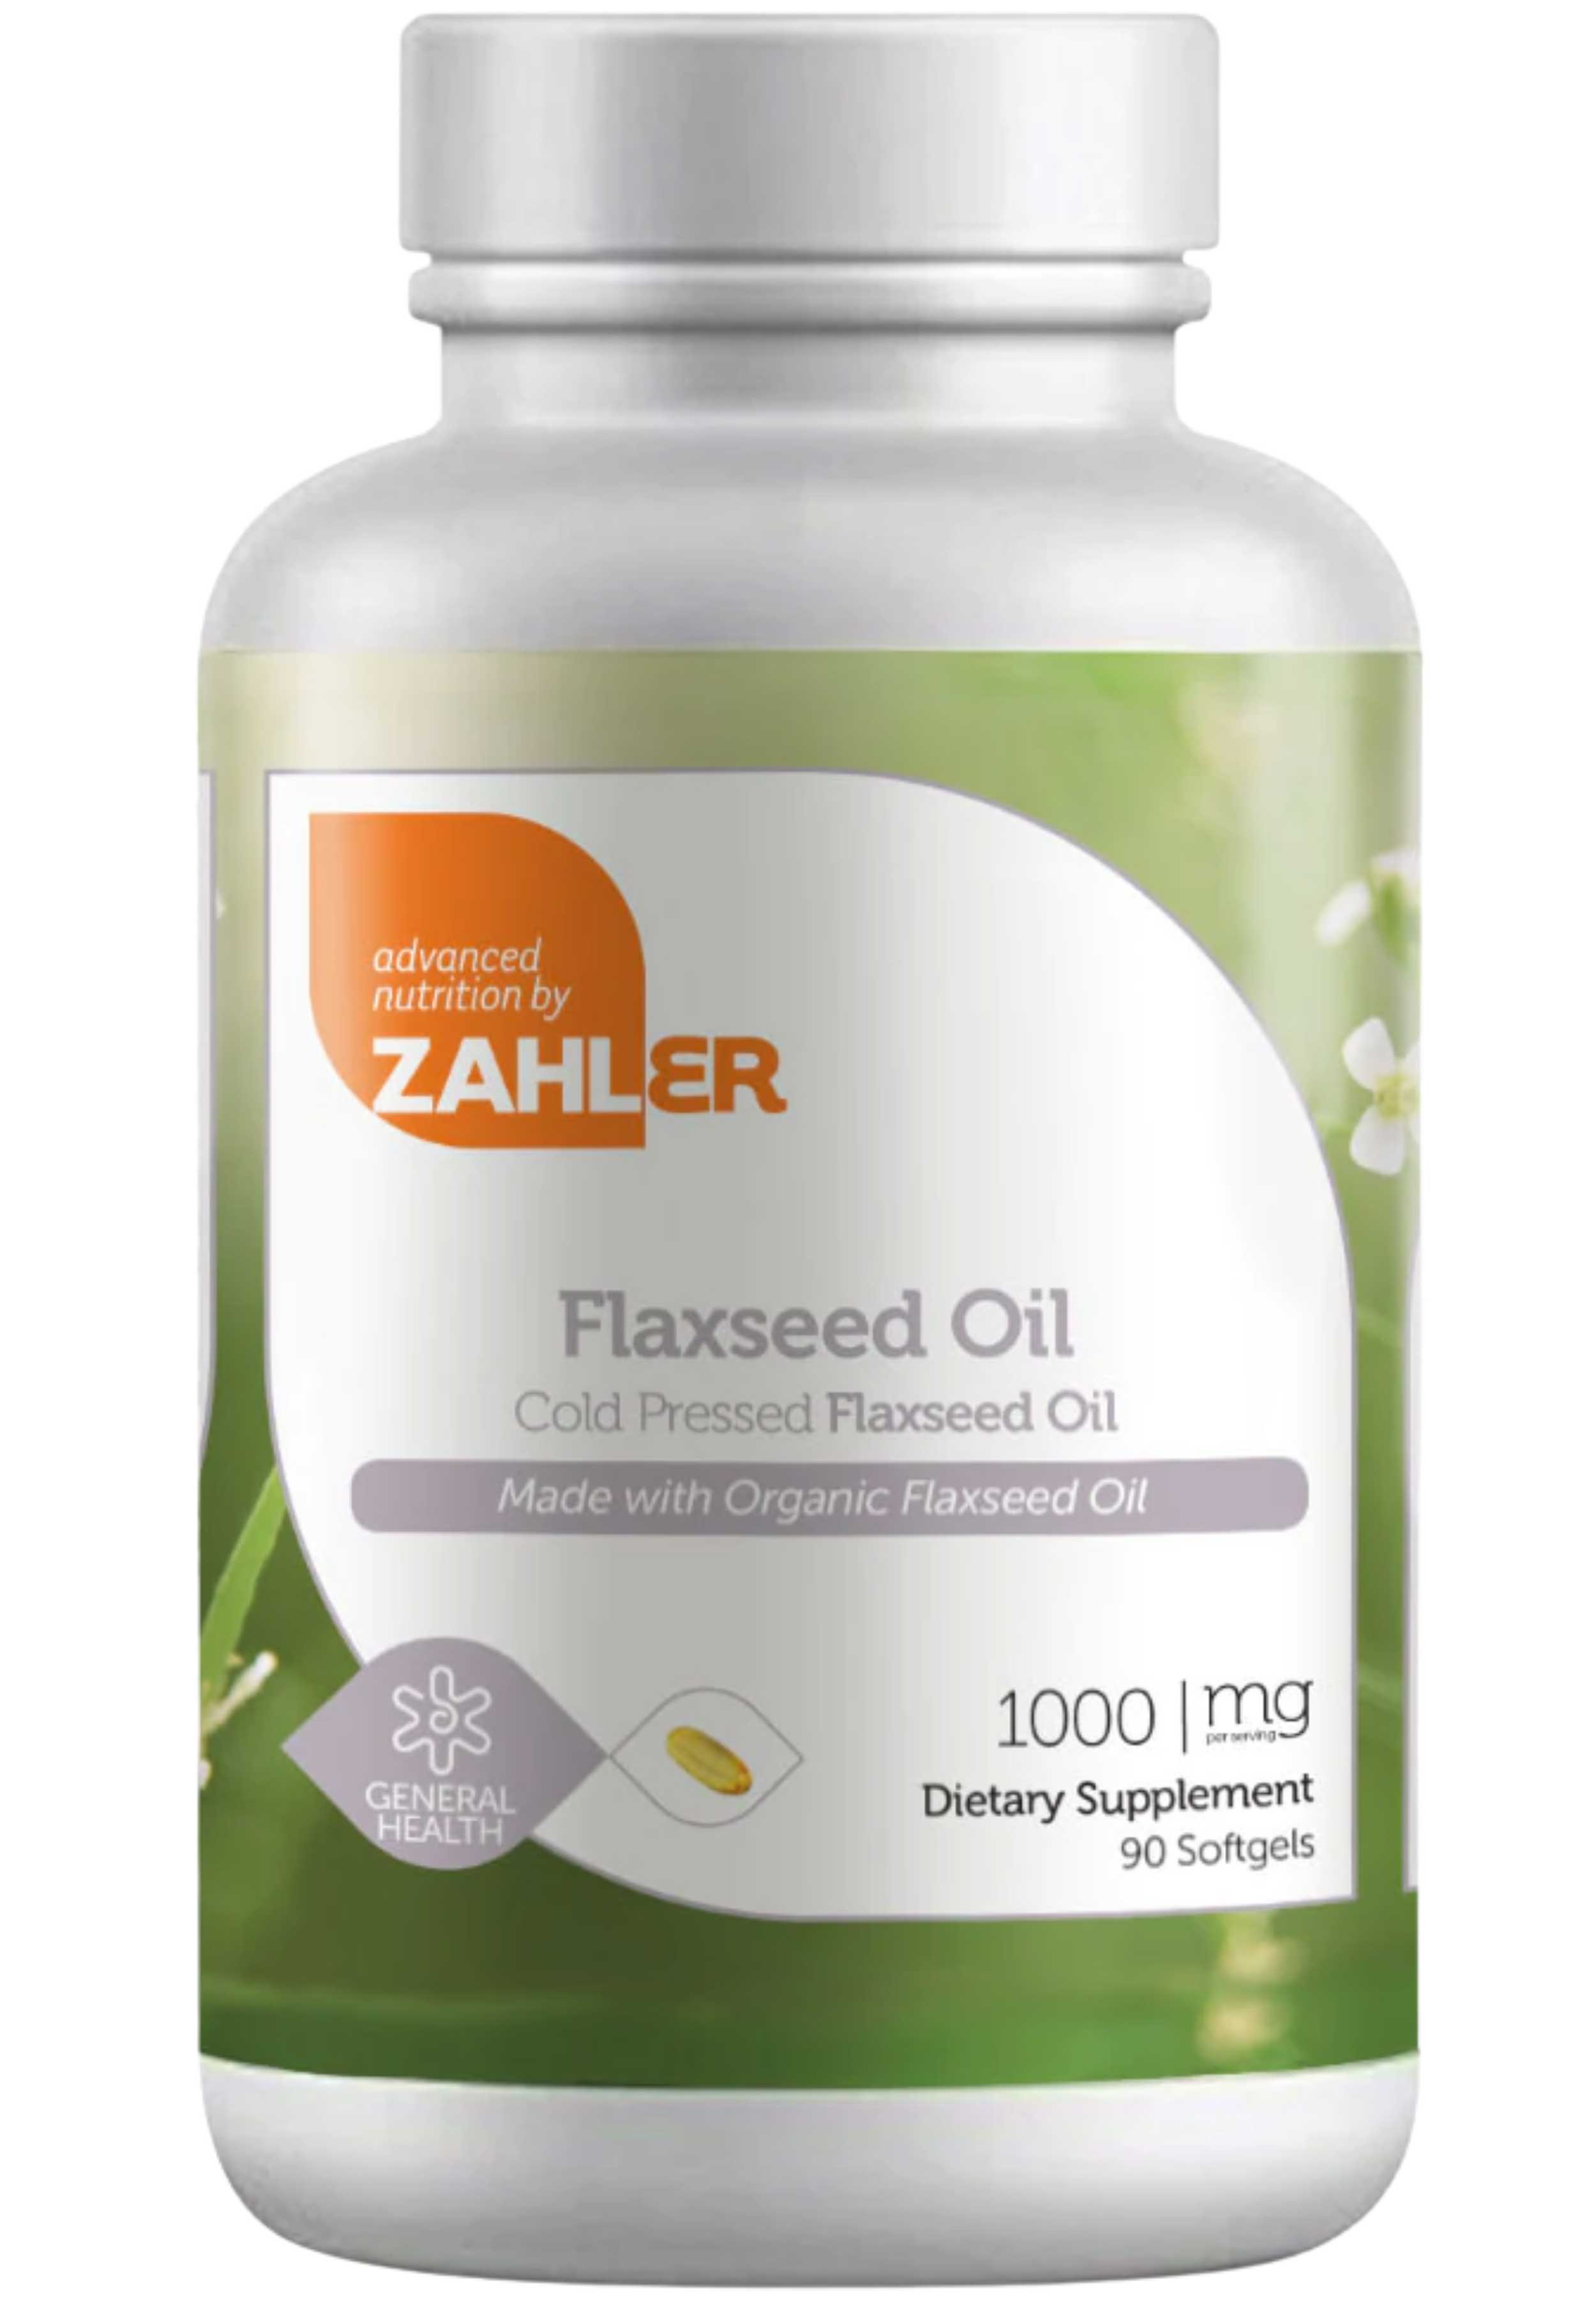 Advanced Nutrition By Zahler Flaxseed Oil